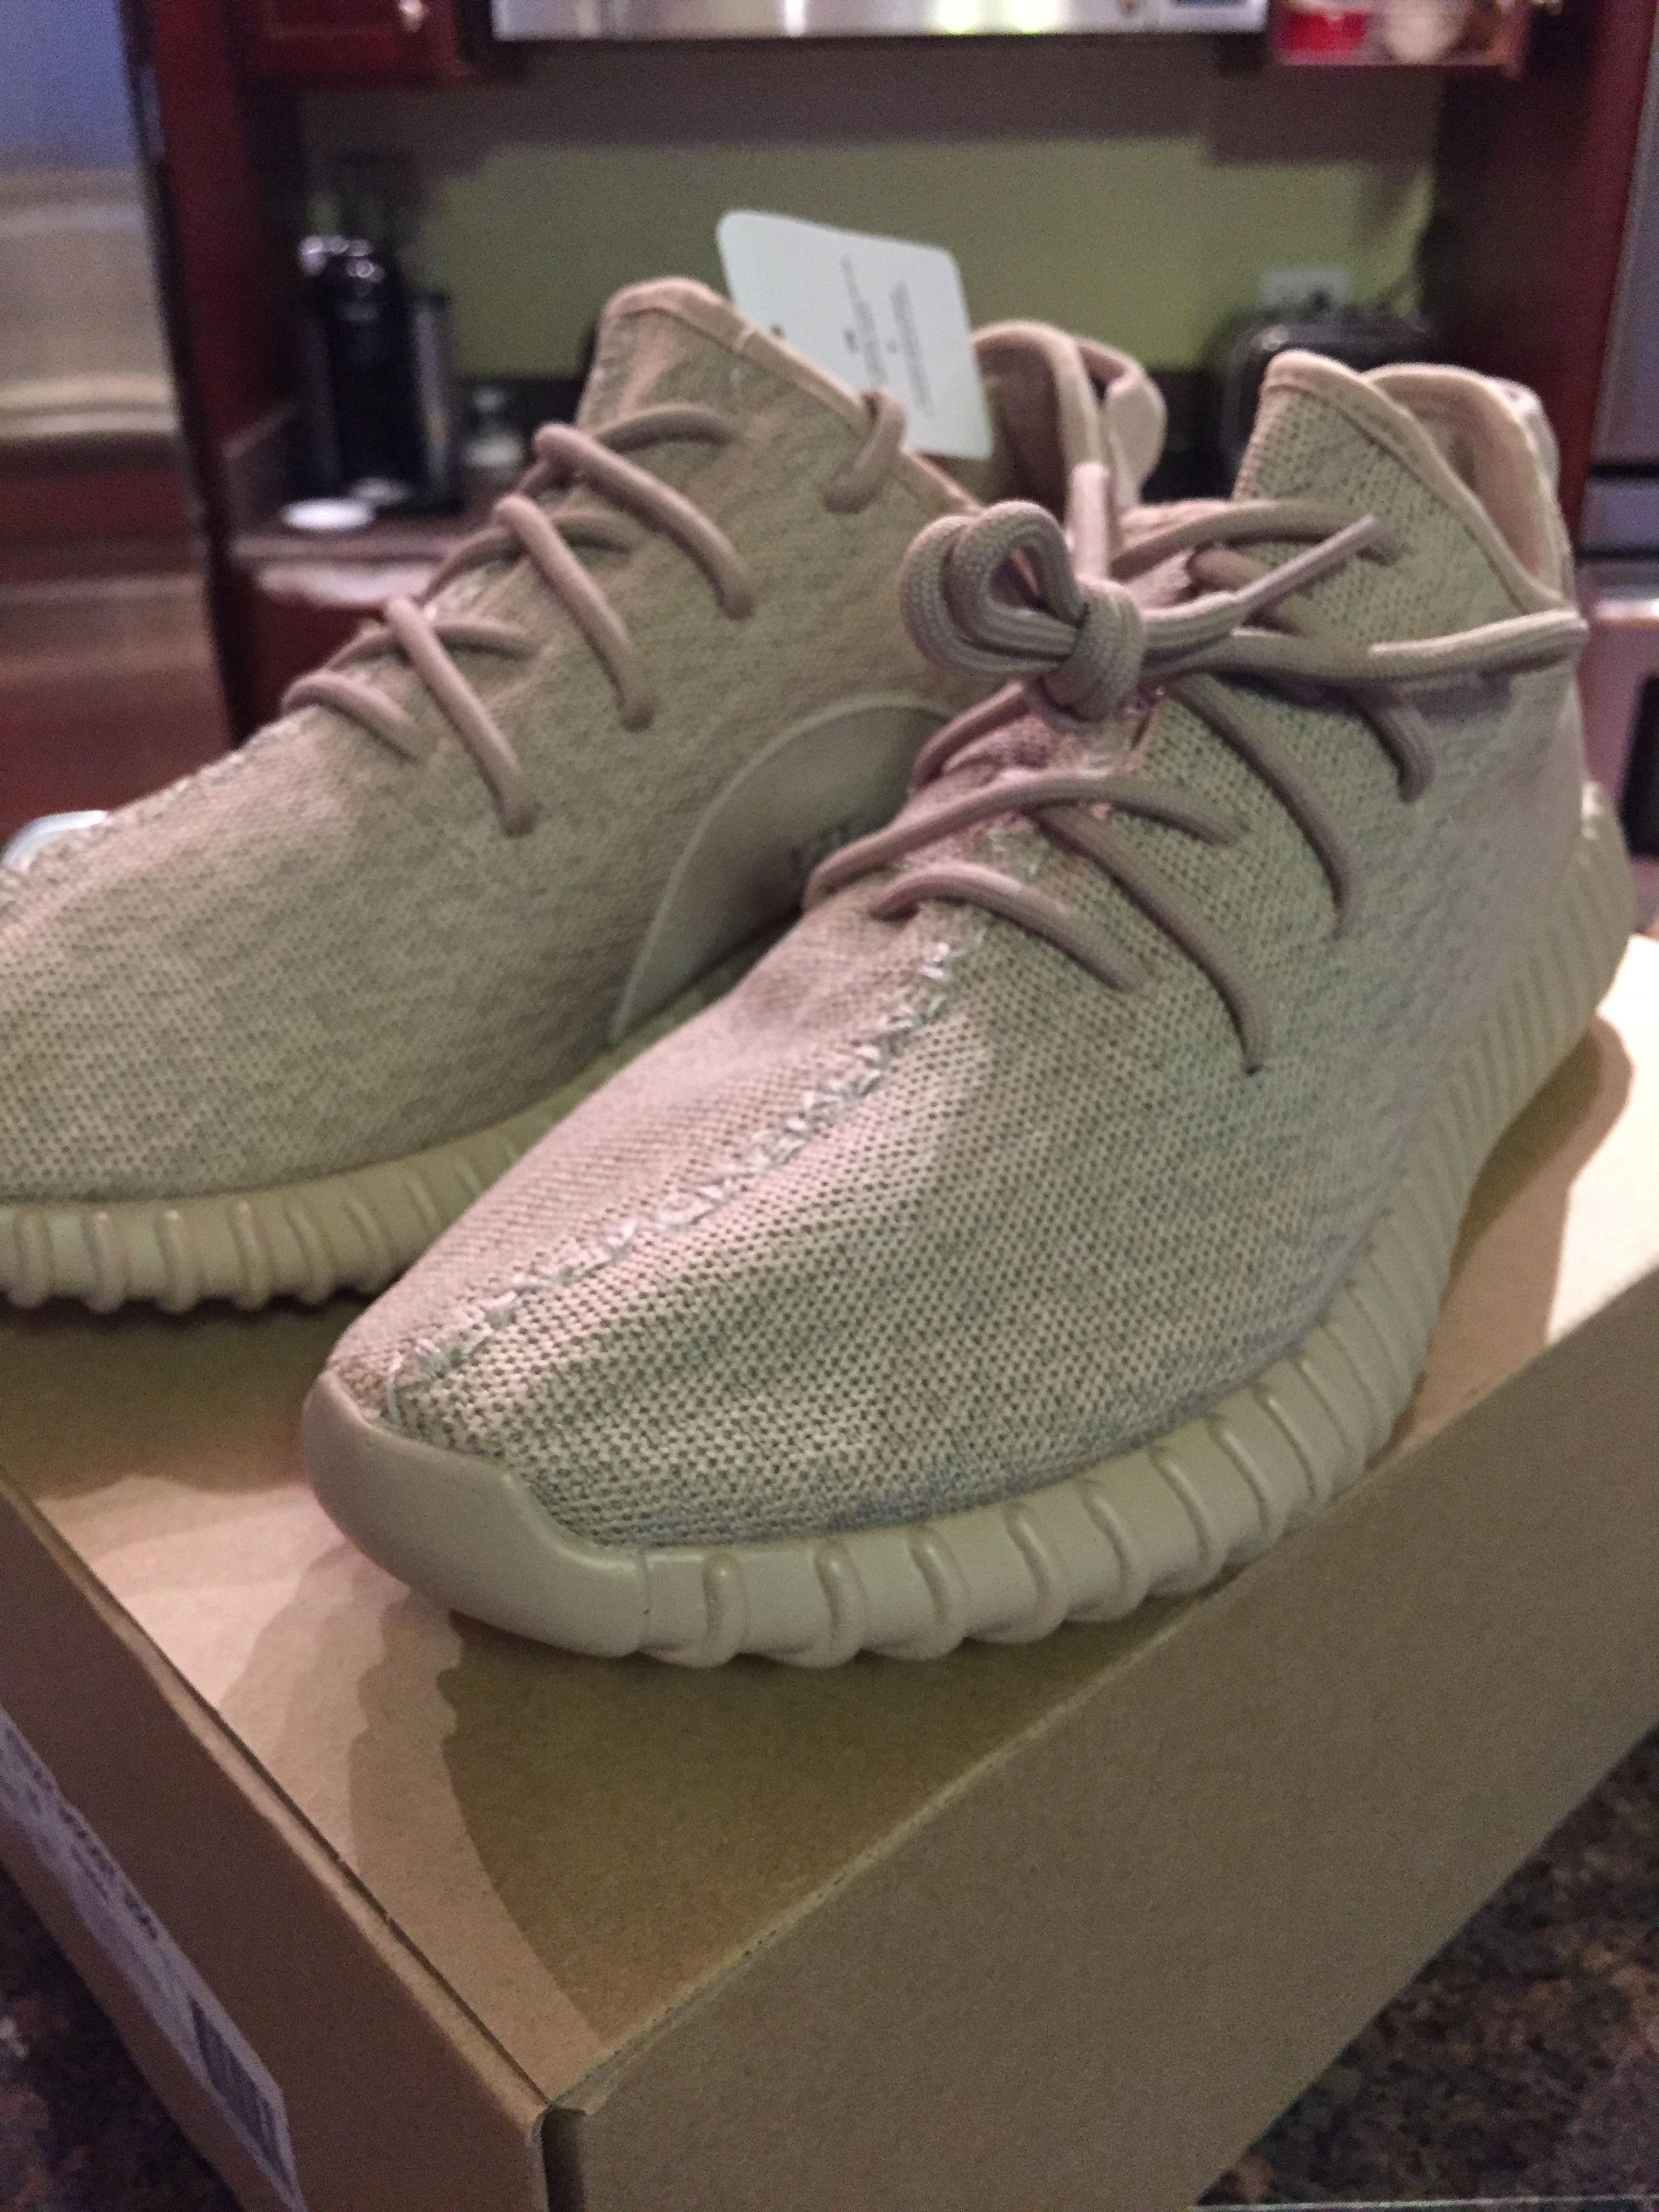 Adidas Yeezy 350 Oxford Tans - NEW Size US 10.5 / EU 43-44 - 3 Preview